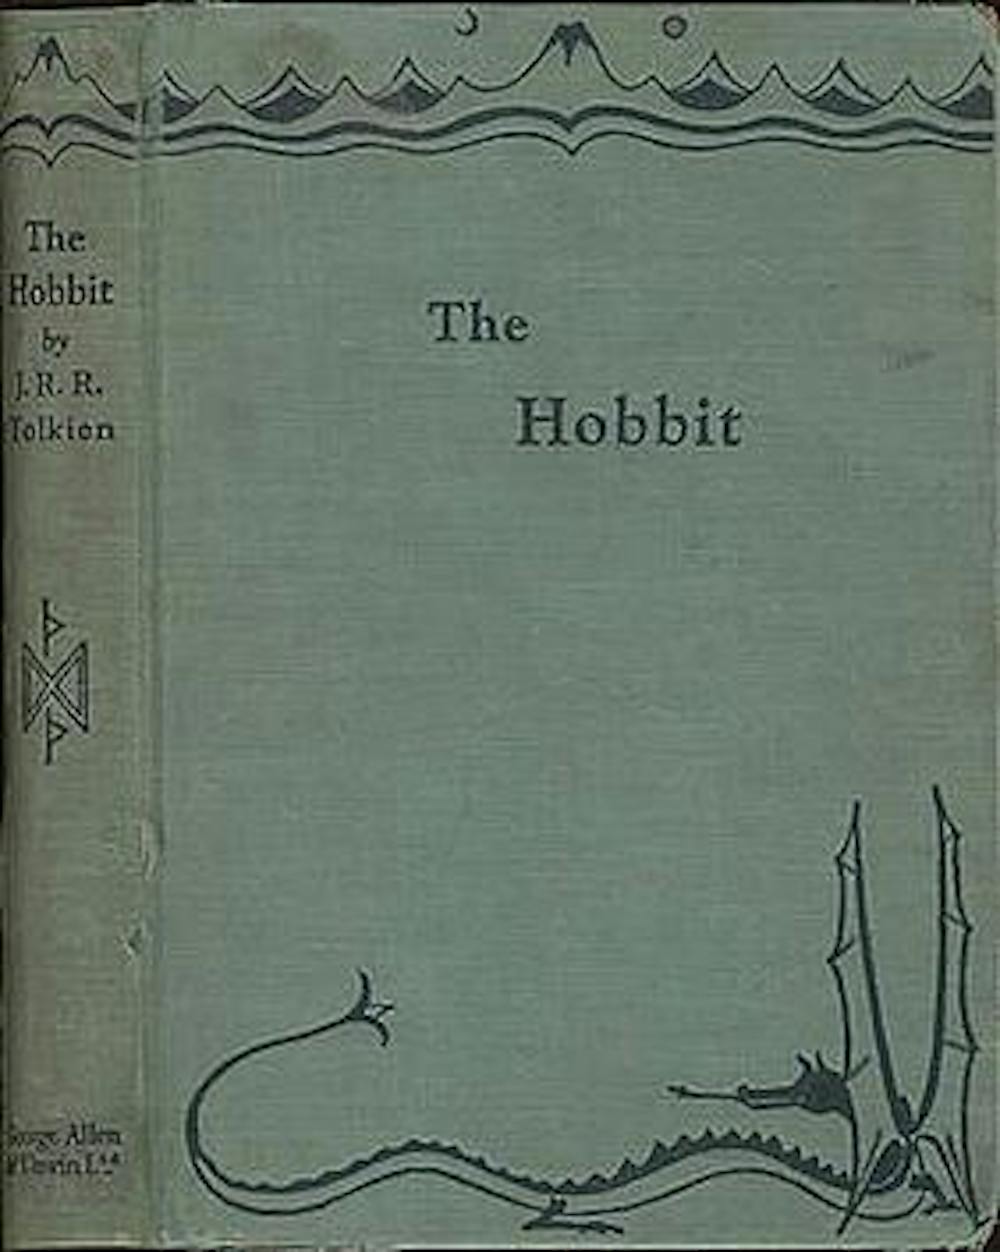 The Lord Of The Rings Tolkien First Editions